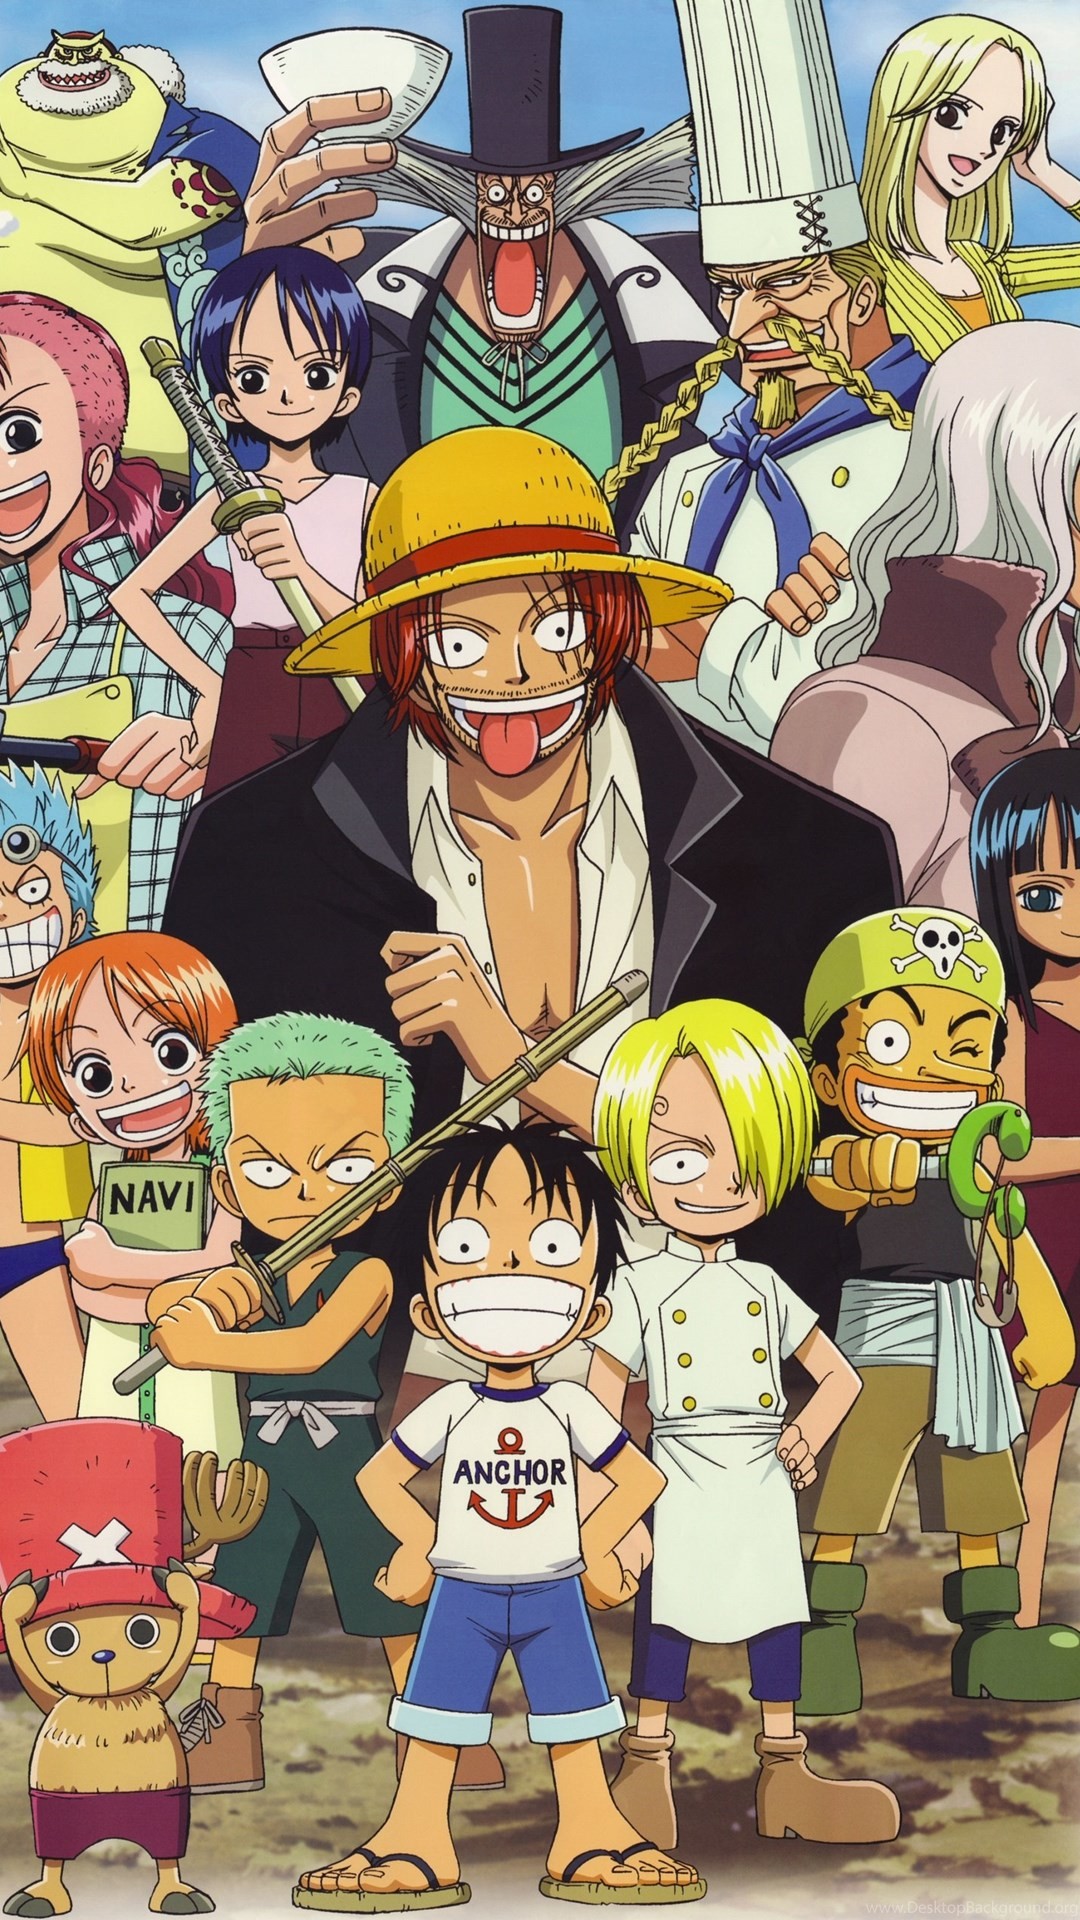 One Piece Phone Wallpaper 59 Pictures